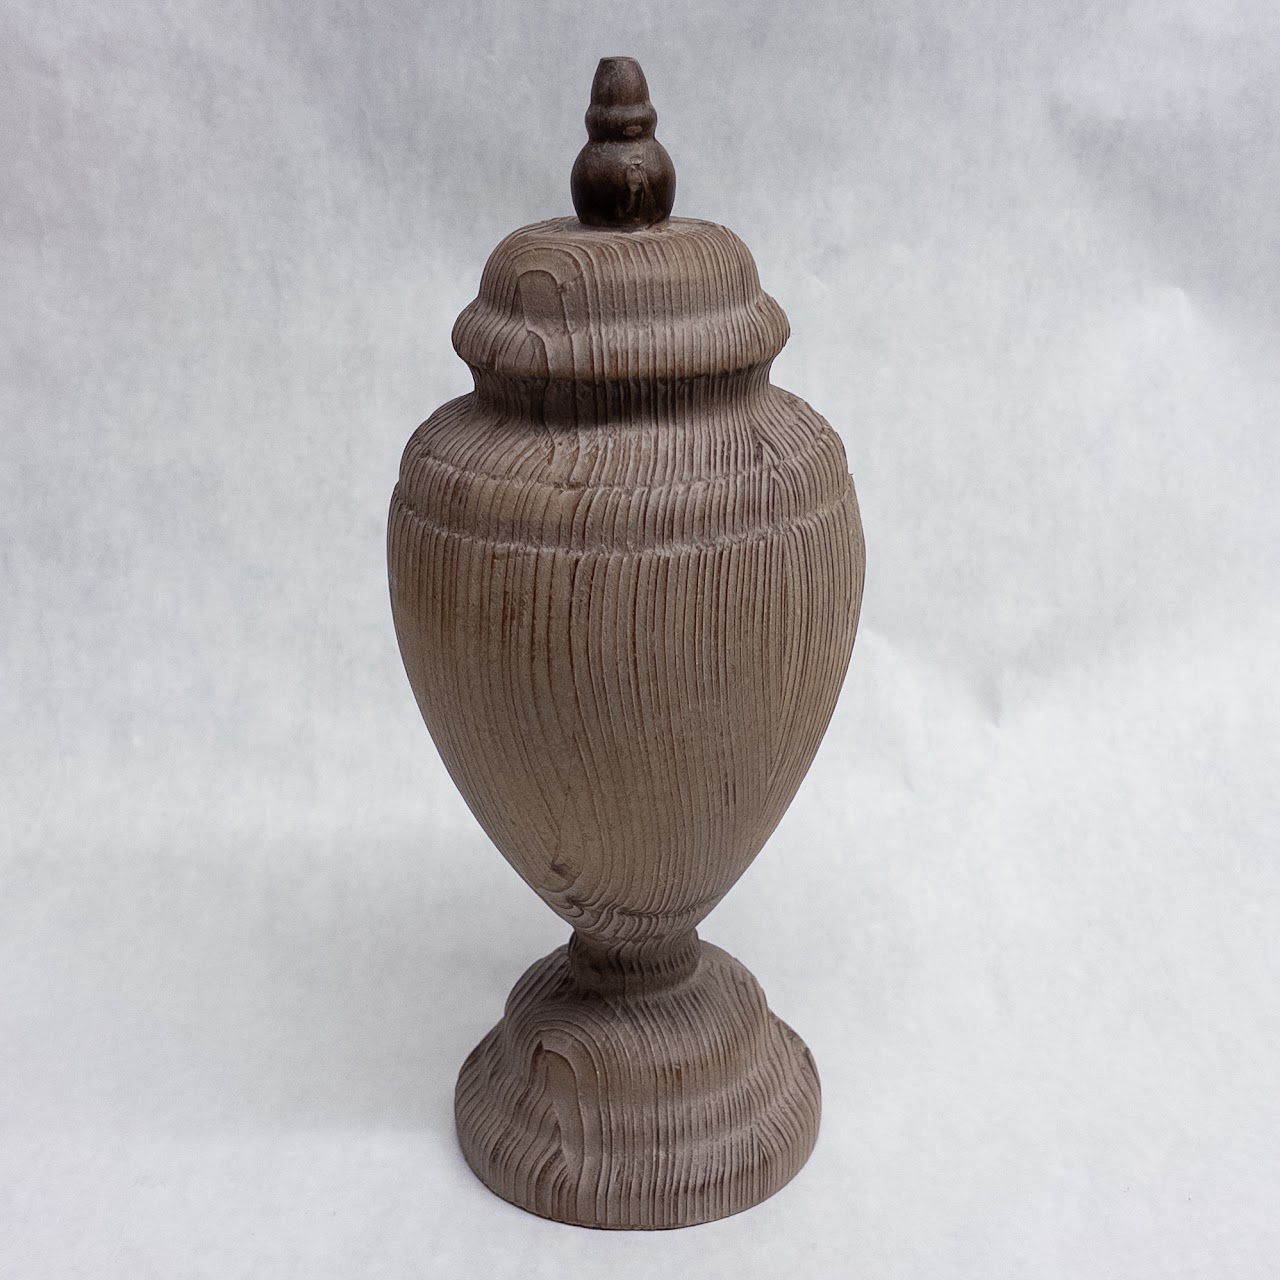 Weathered White Pine Wood Pair of Urn Shaped Sculptures